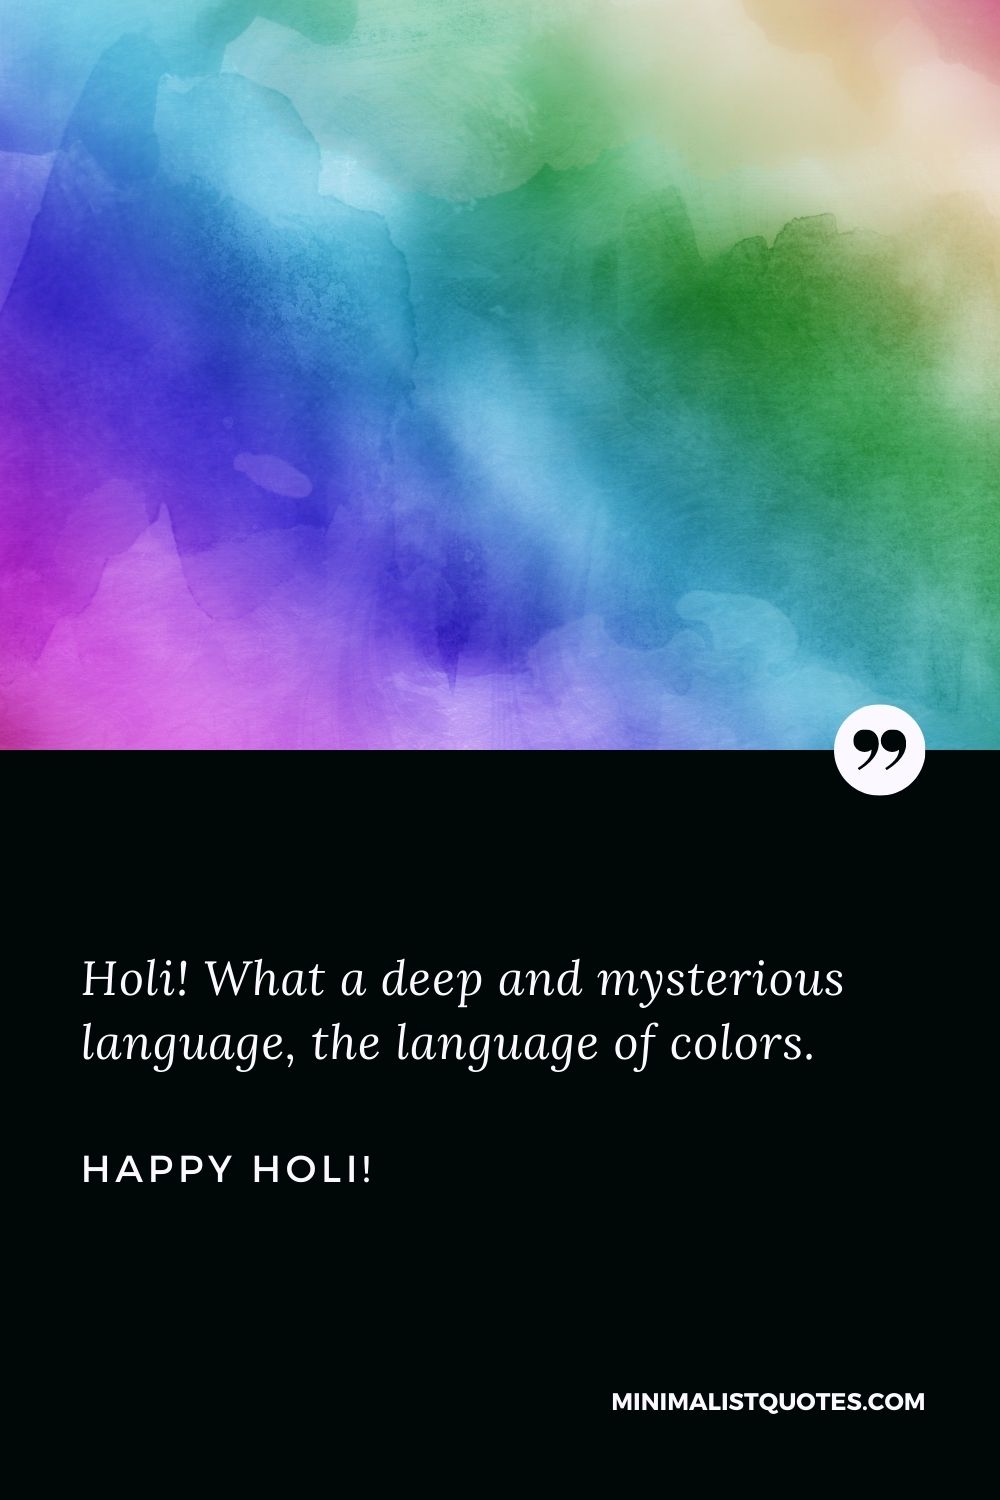 Holi! What a deep and mysterious language, the language of colors ...